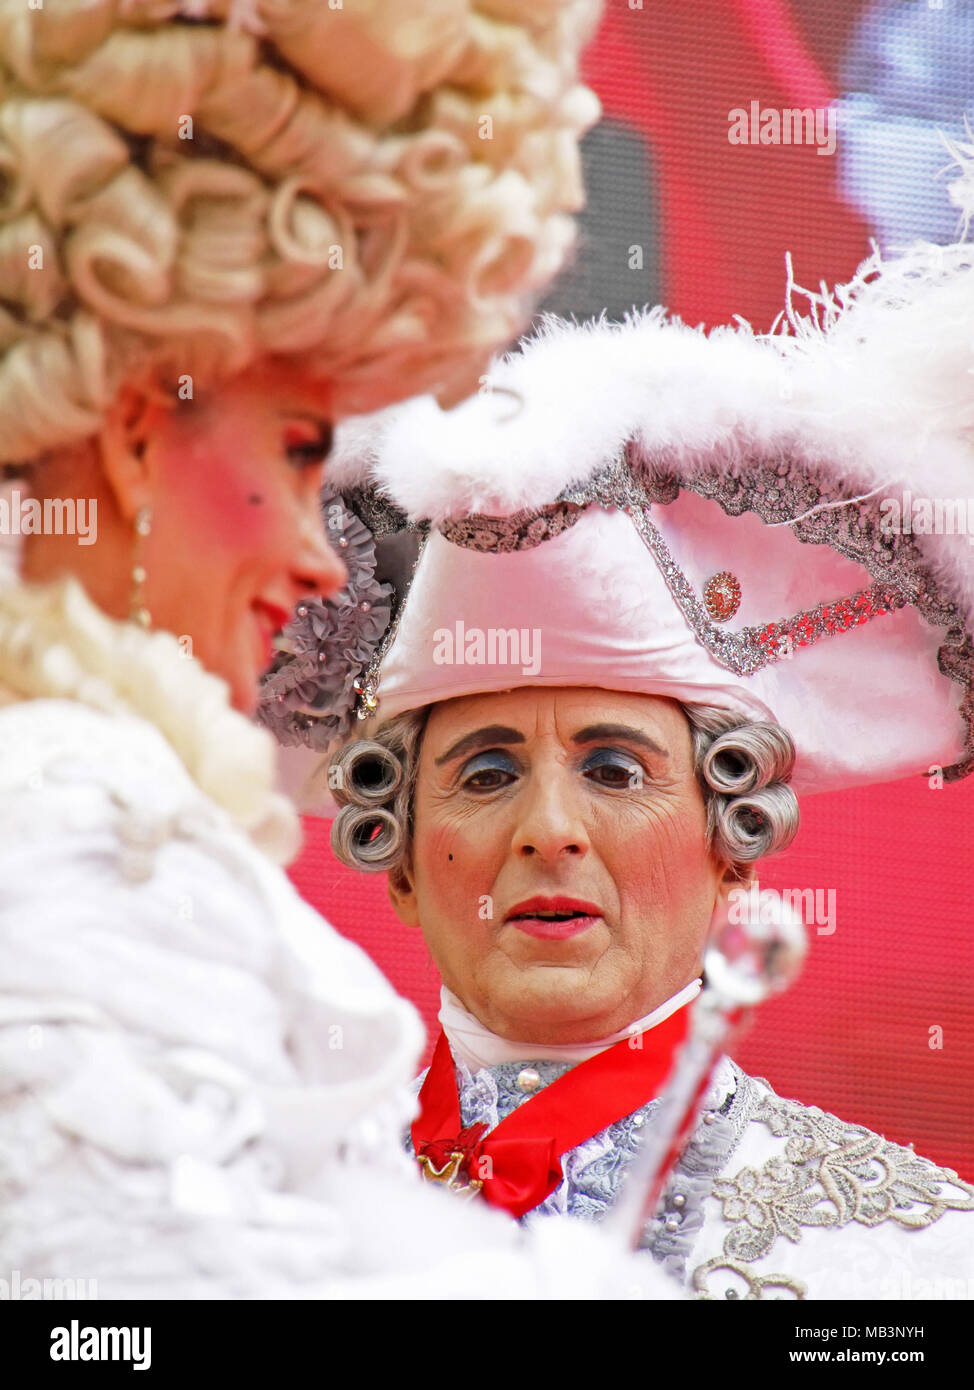 Man and woman at Carnival, St Marks Square, Venice, Italy Stock Photo